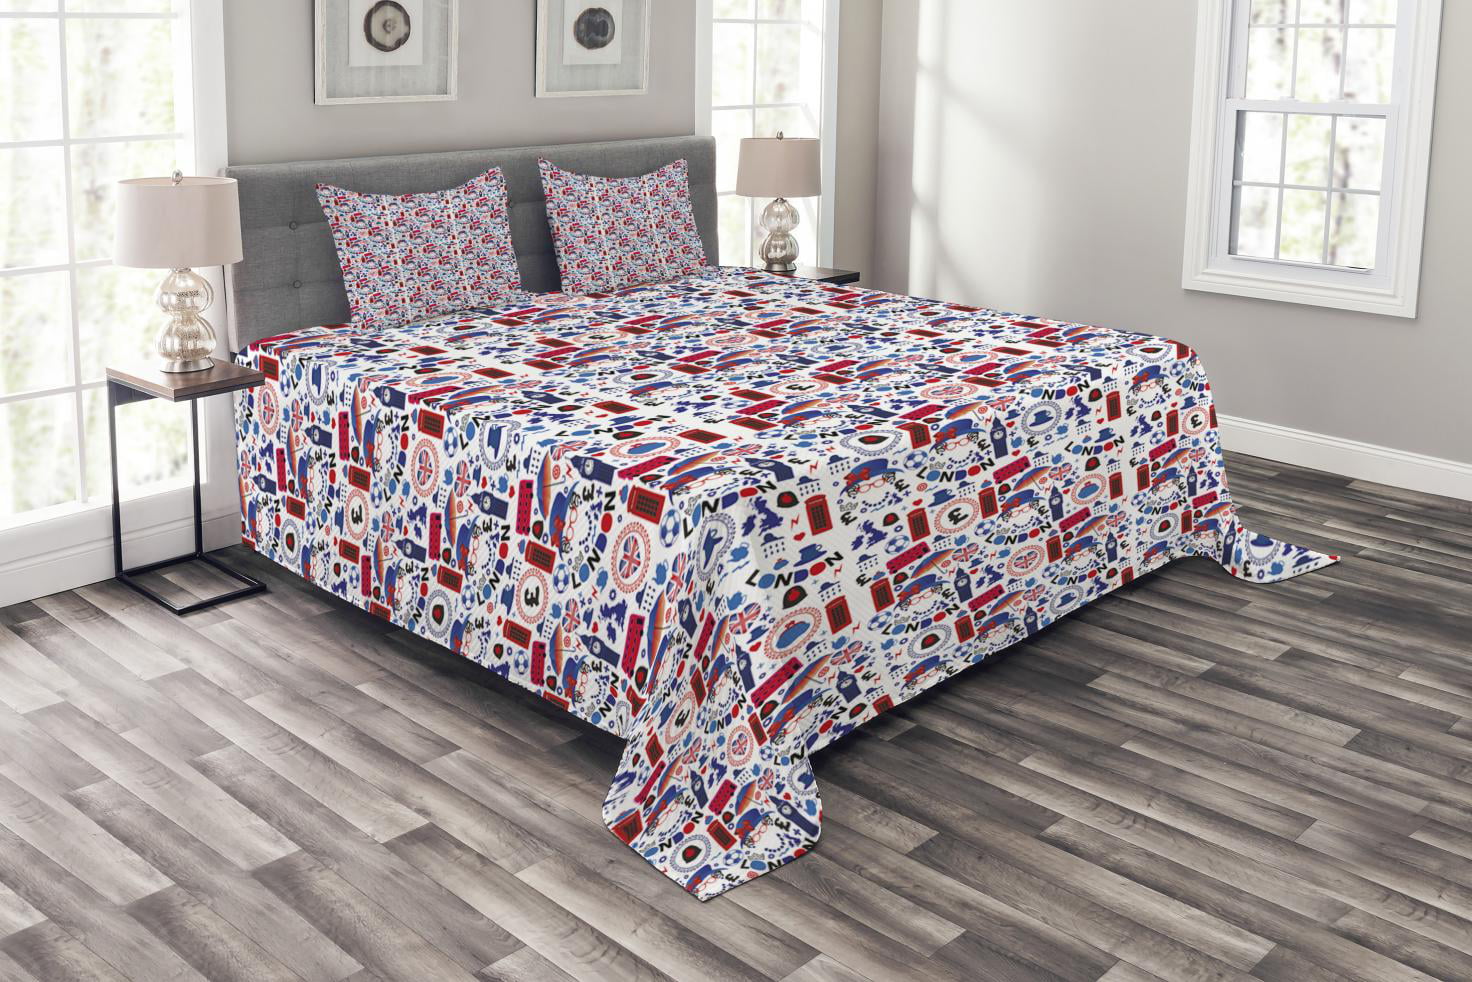 Popular English Icons Print Details about   London Quilted Bedspread & Pillow Shams Set